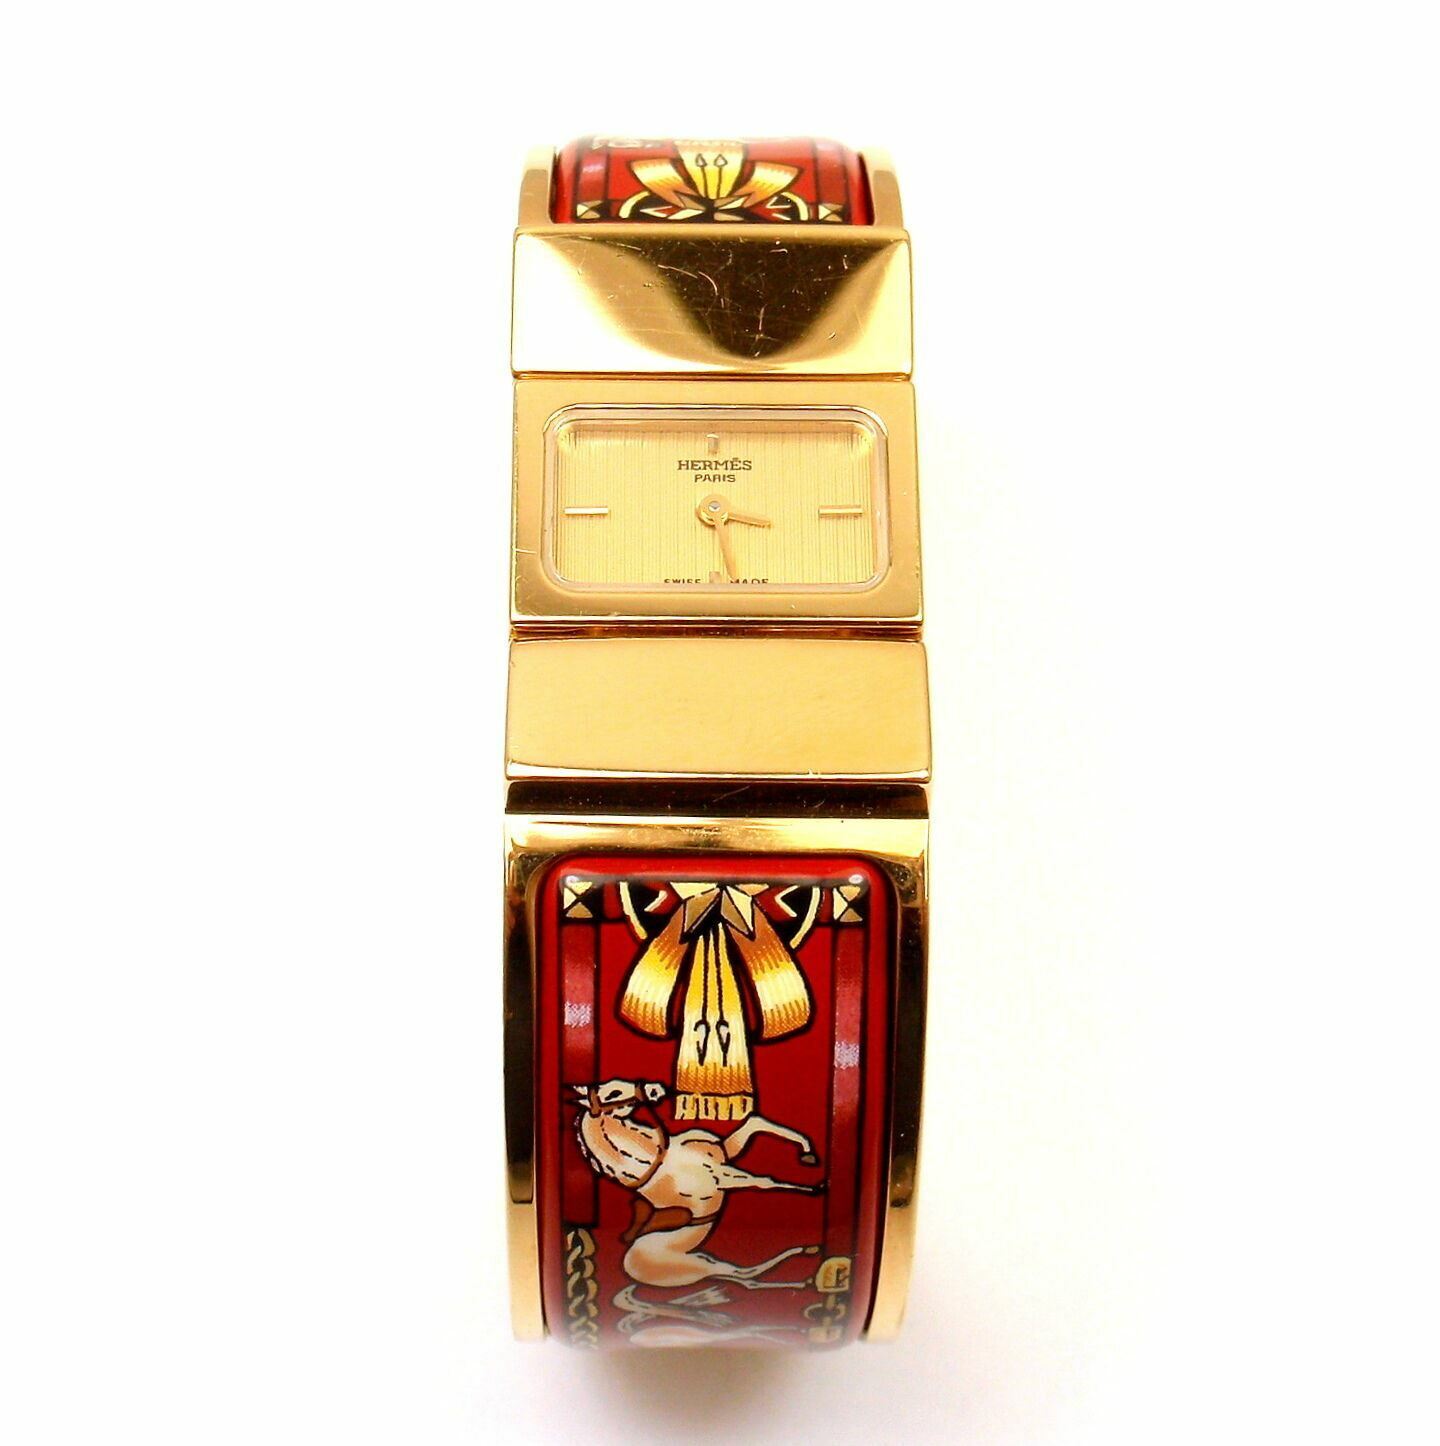 Hermes Jewelry & Watches:Watches, Parts & Accessories:Watches:Wristwatches Authentic! Hermes Loquet Red Horse Equestrian Motif Bangle Bracelet Watch